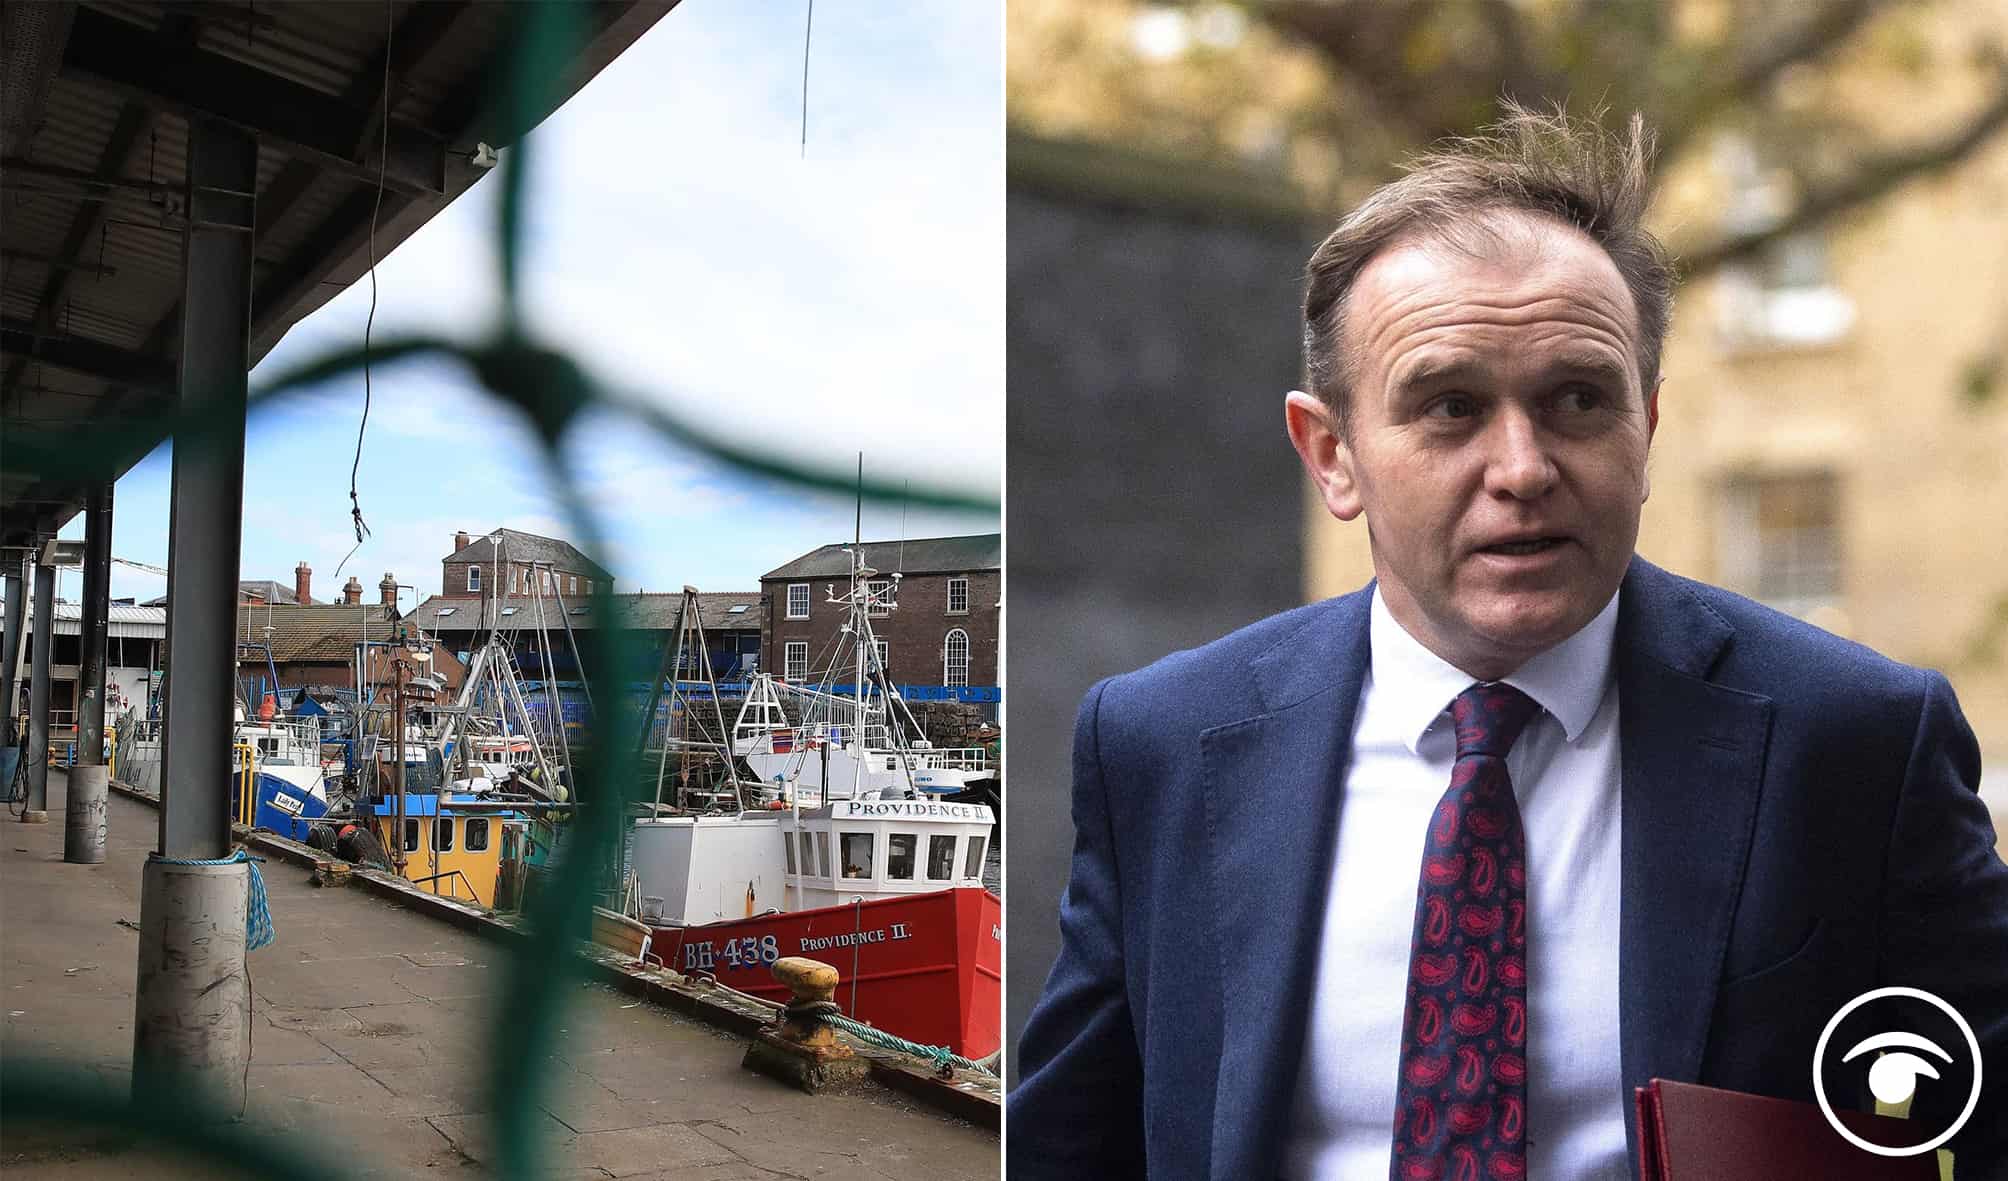 EU ‘unexpectedly’ changed its position on shellfish, claims George Eustice